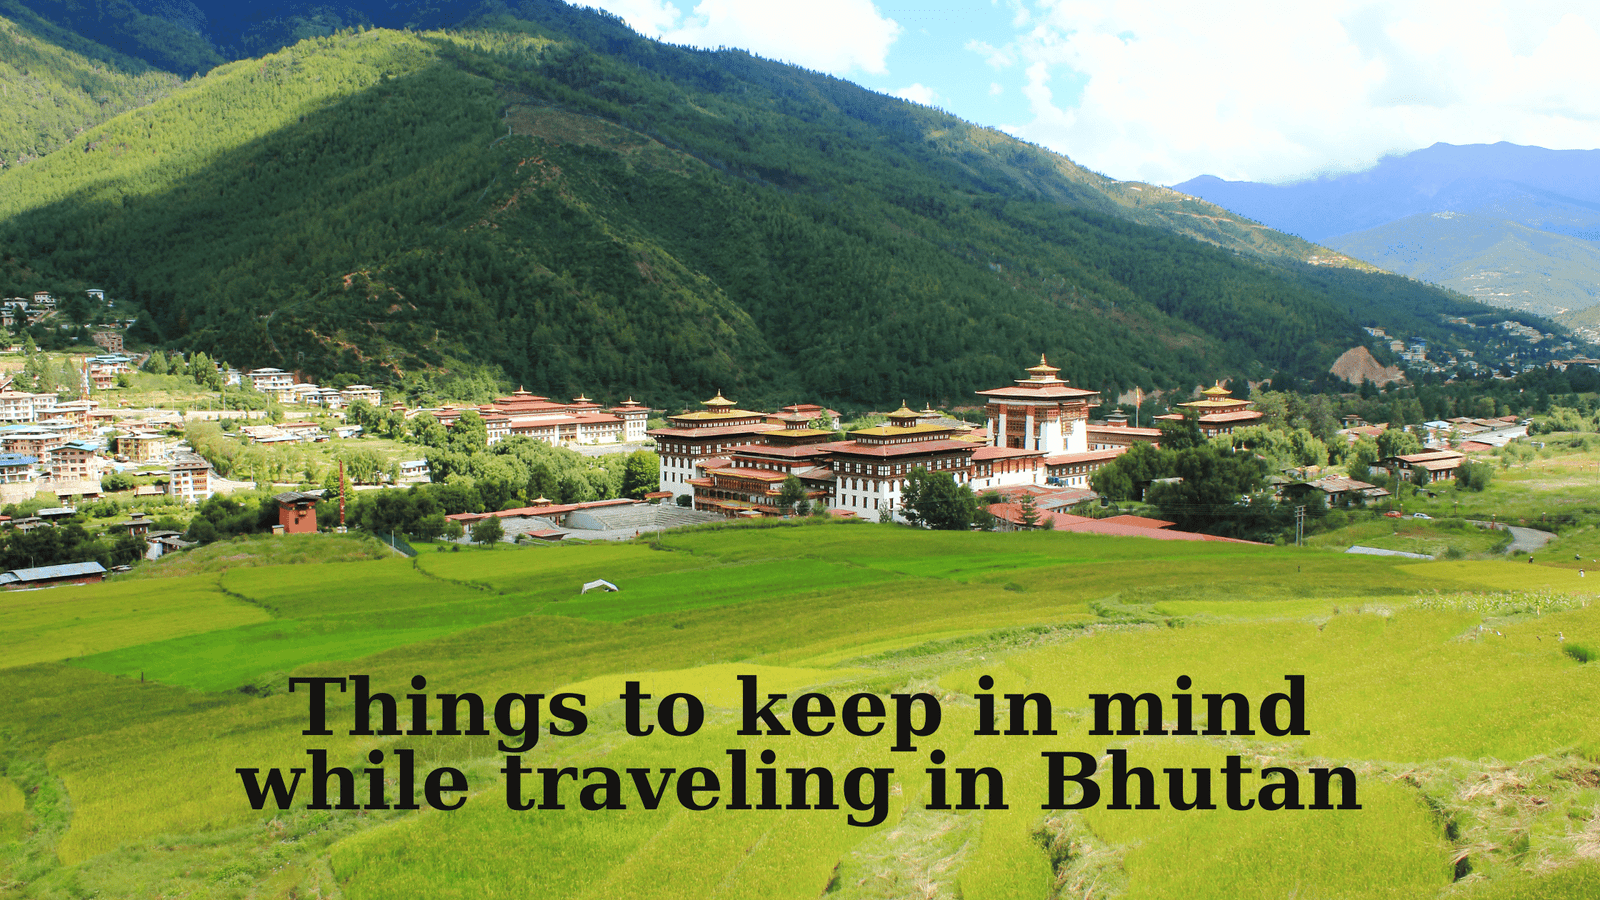 Things to Keep in Mind While Traveling in Bhutan